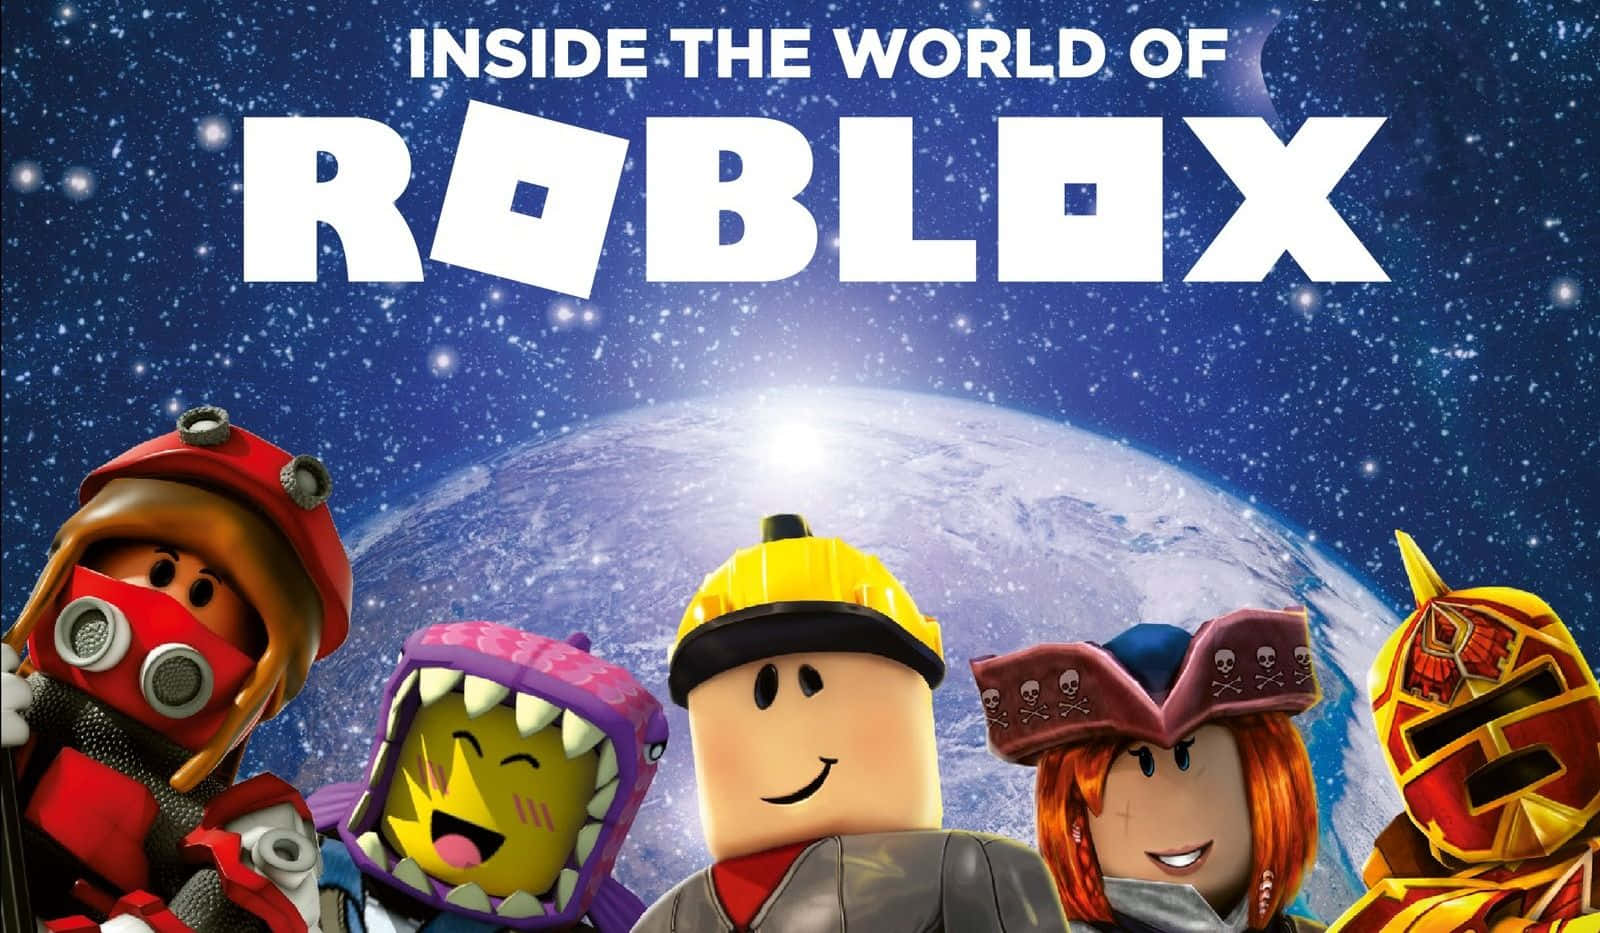 Roblox Gaming Platform: A World of Creativity and Exploration